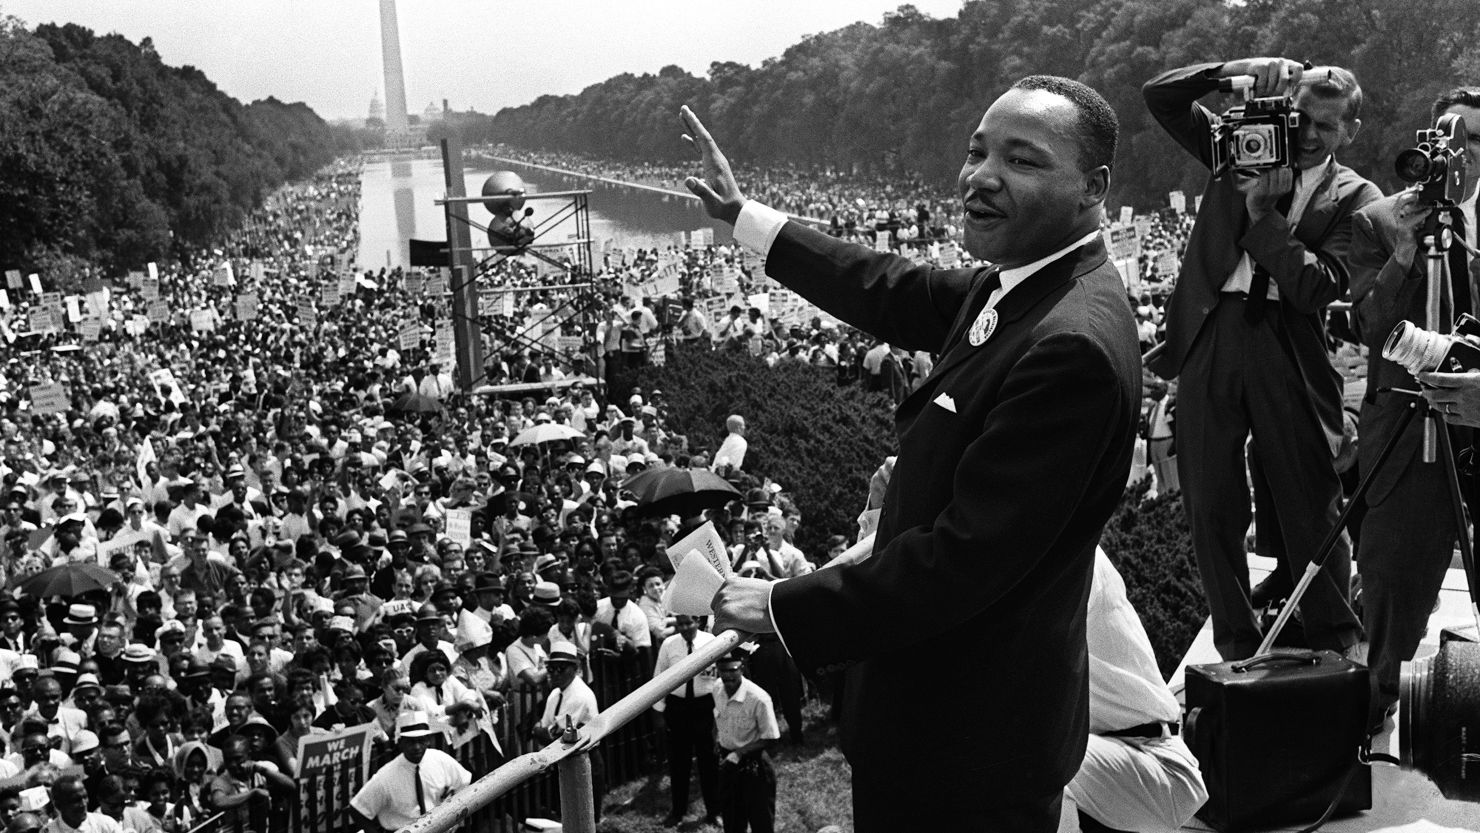 Dr. Martin Luther King Jr. waves to the throngs of people gathered in August 1963 during the March on Washington.